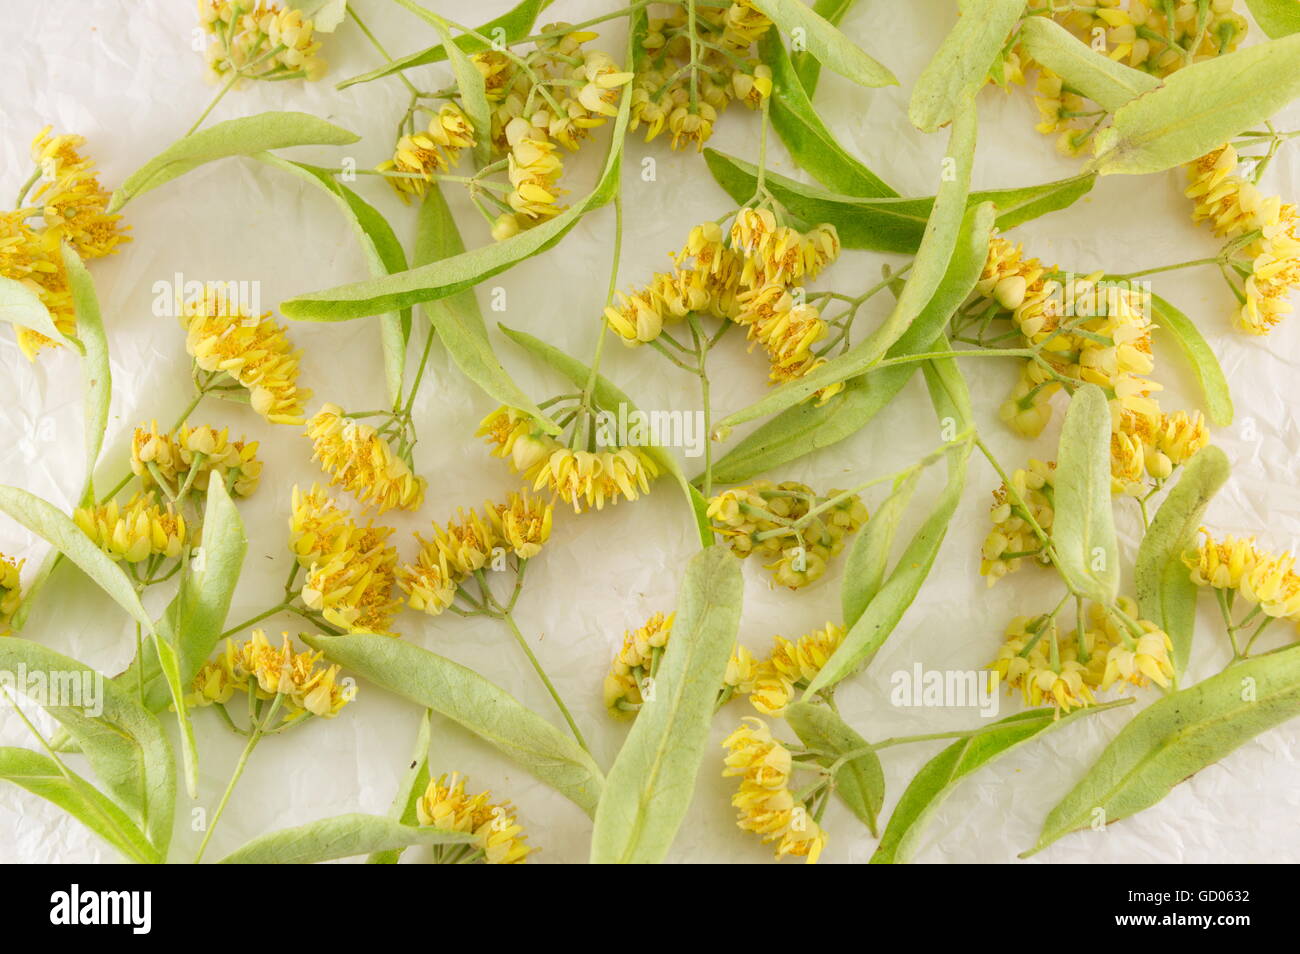 Linden flowers and leaves scattered on wooden table Stock Photo